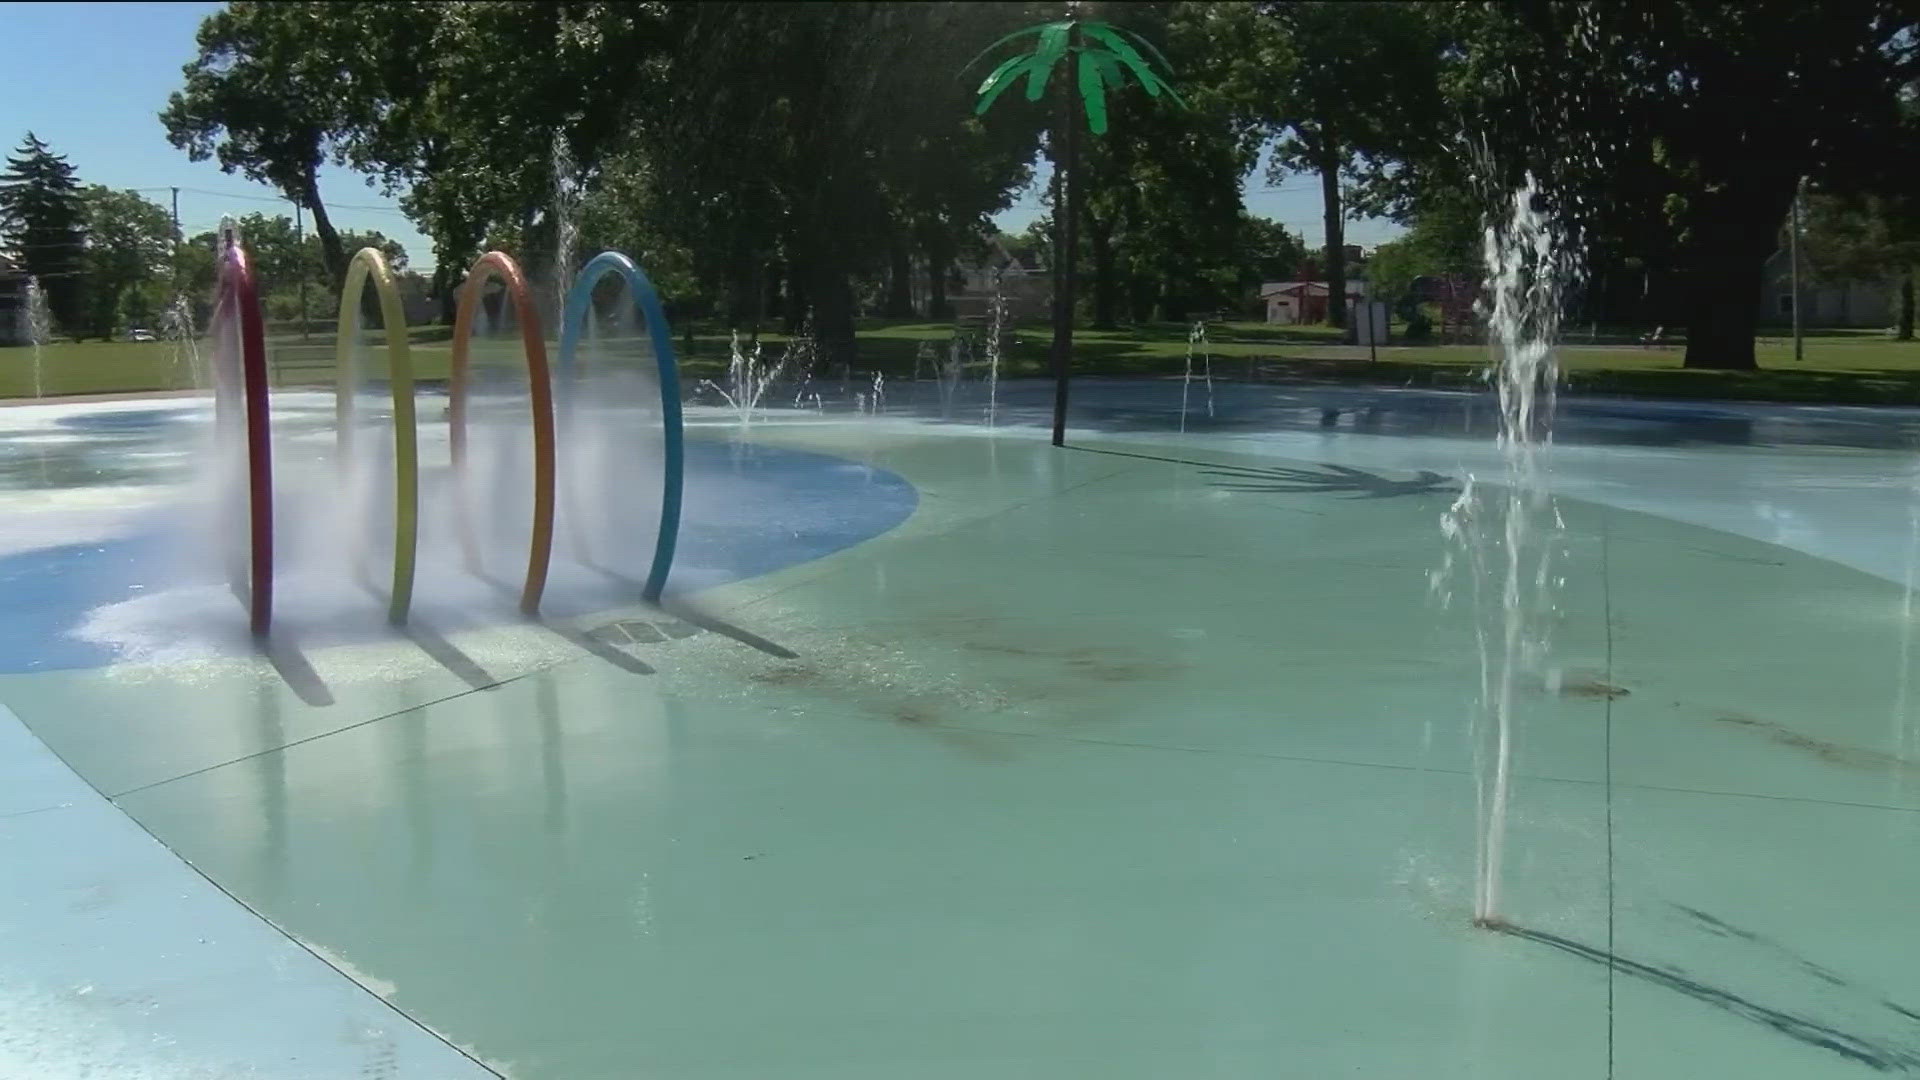 The city said the splash pad will is now open after "making all of the necessary valve adjustments to the water system."